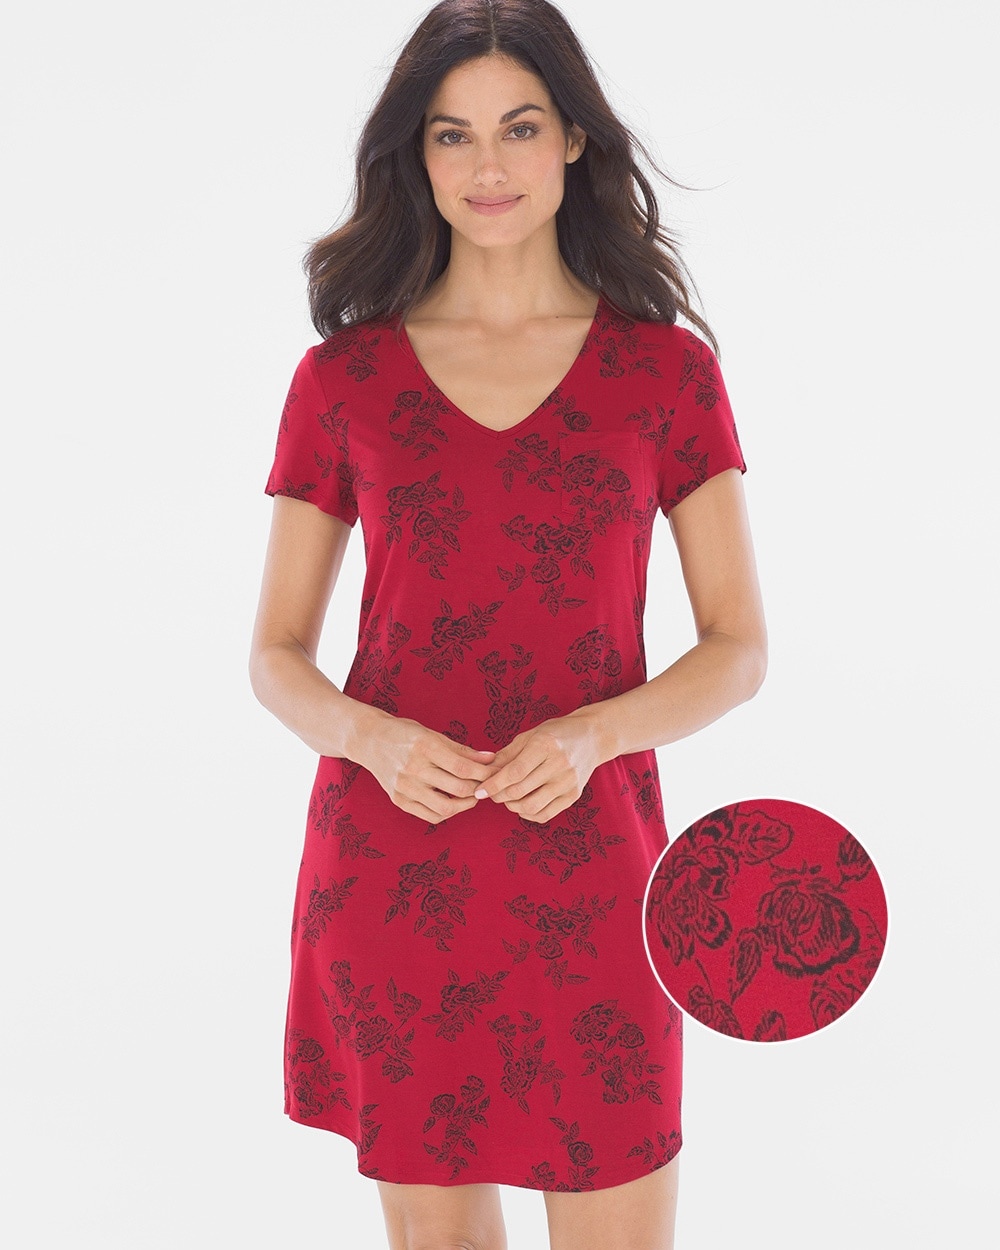 Cool Nights Short Sleeve Sleepshirt Lace Floral Red